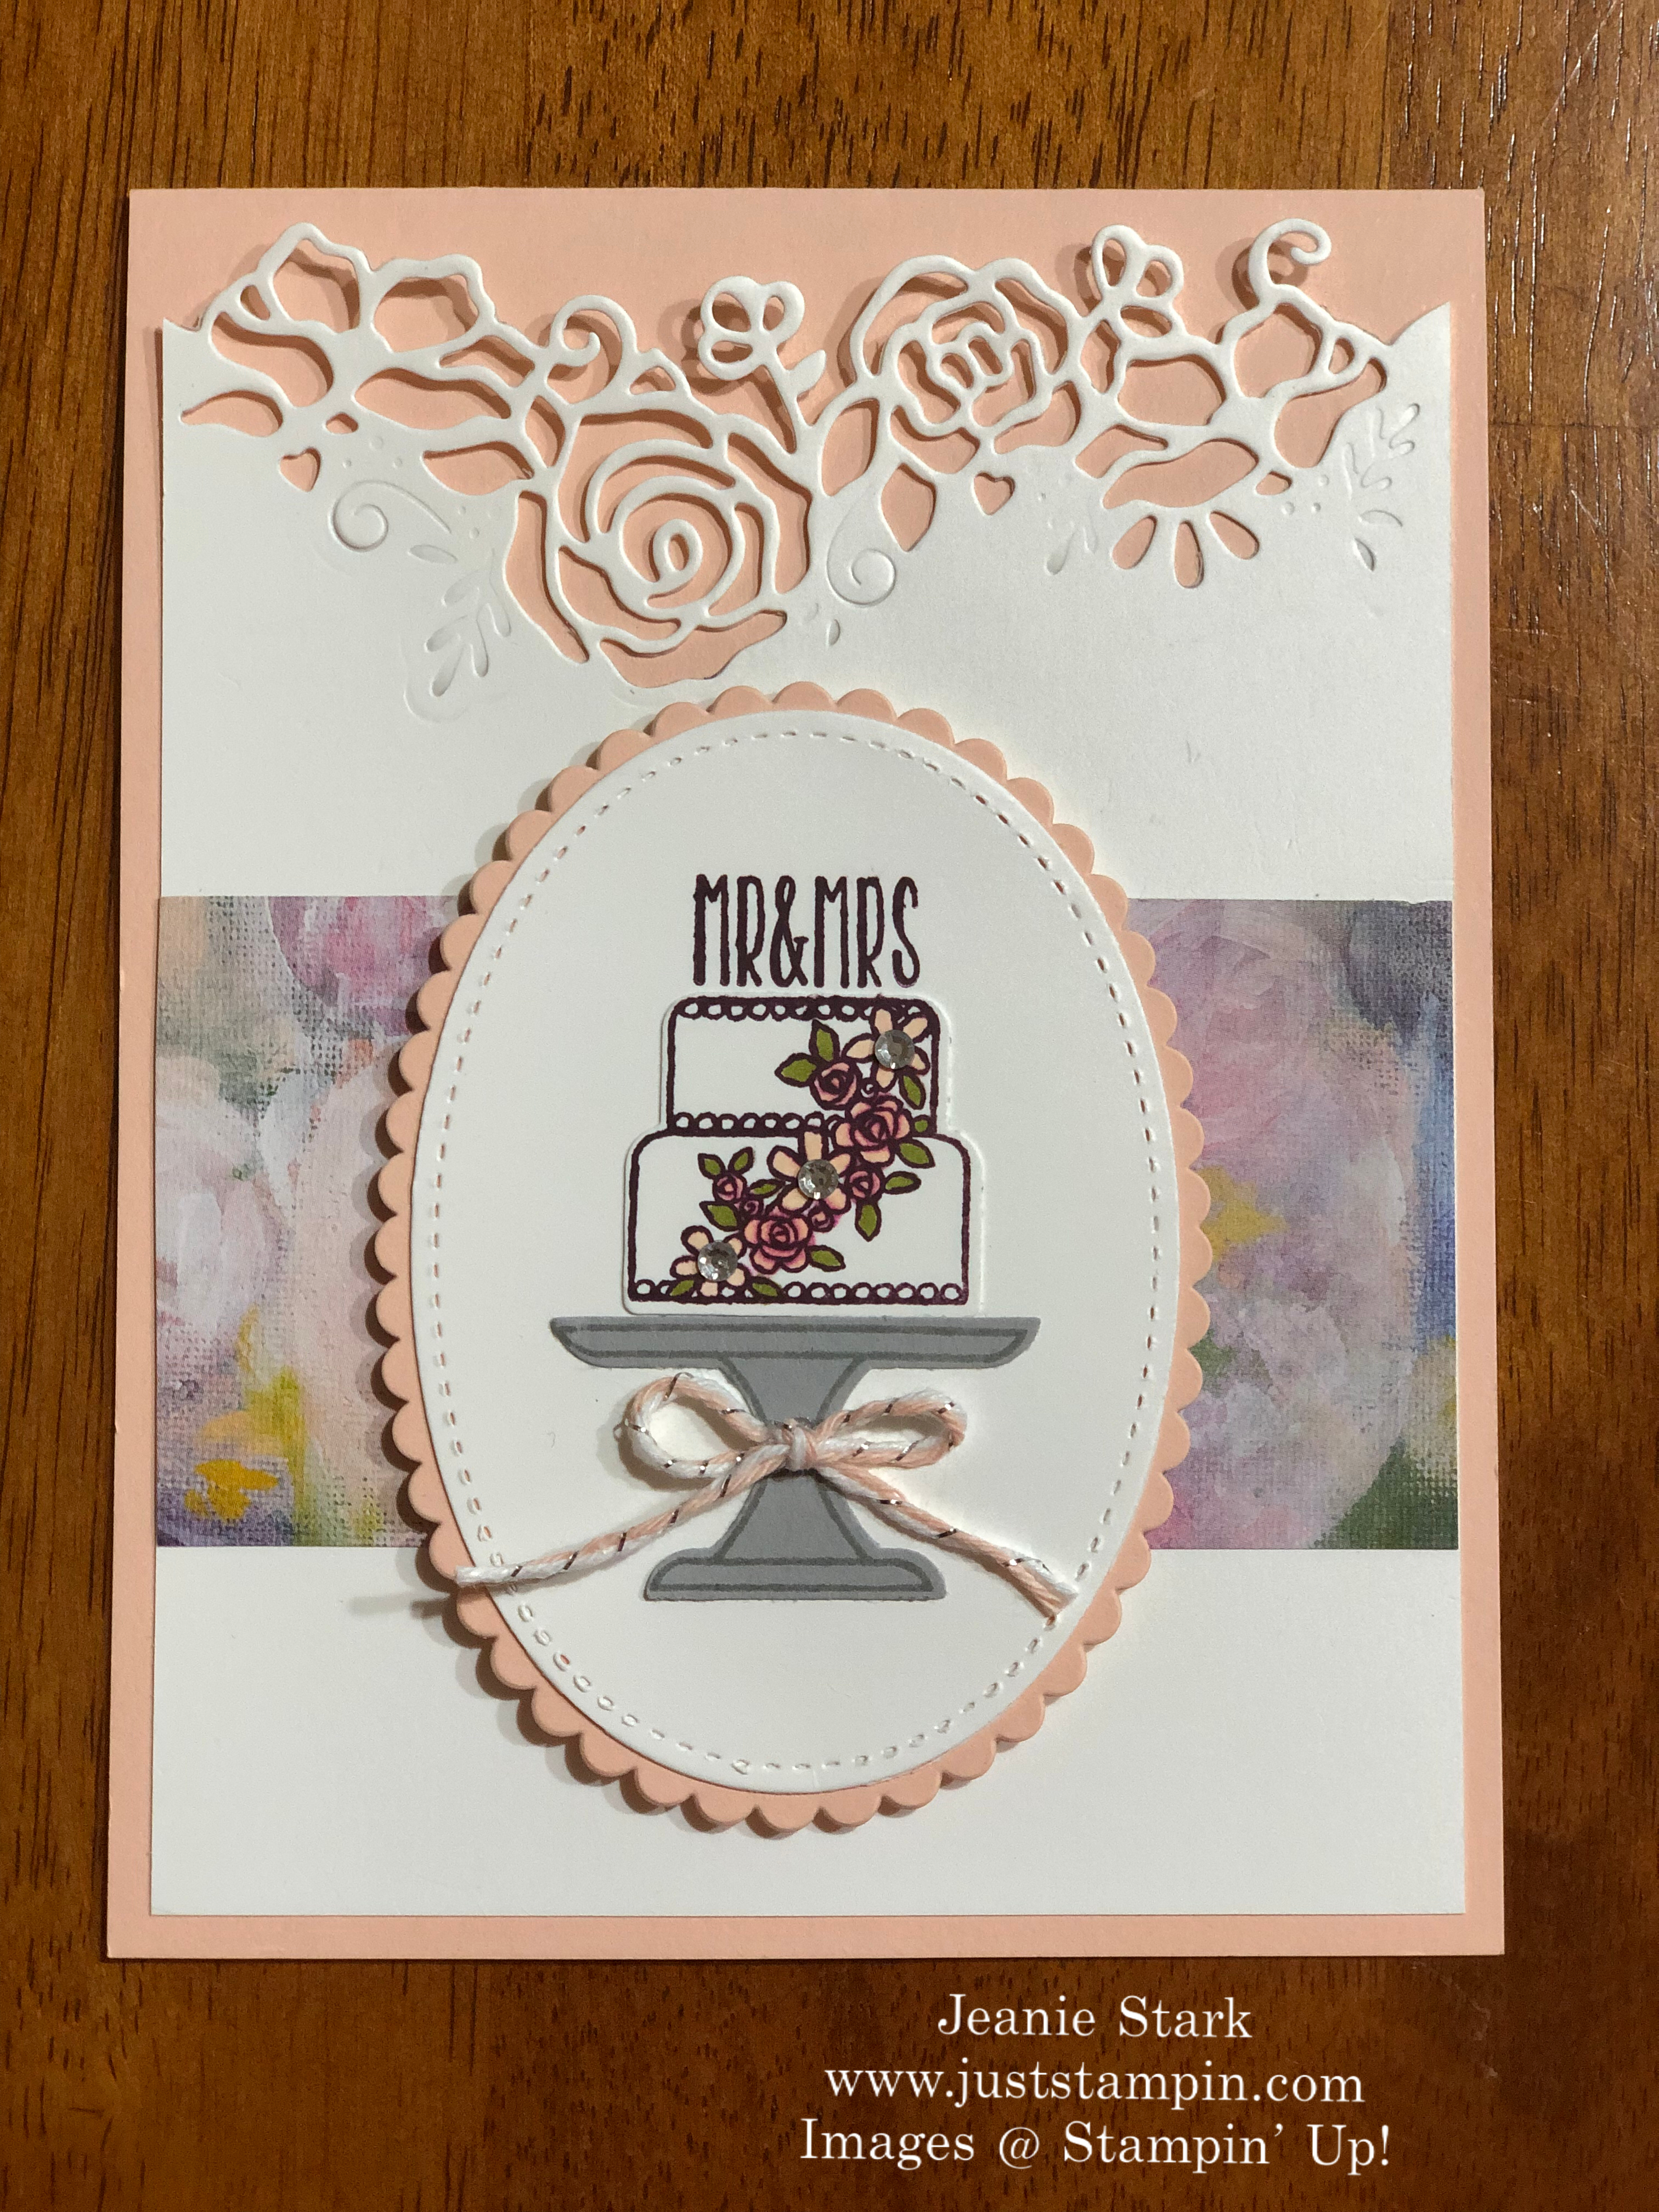 Stampin' Up! Piece of Cake and Lovely Flowers Wedding card idea - Jeanie Stark StampinUp